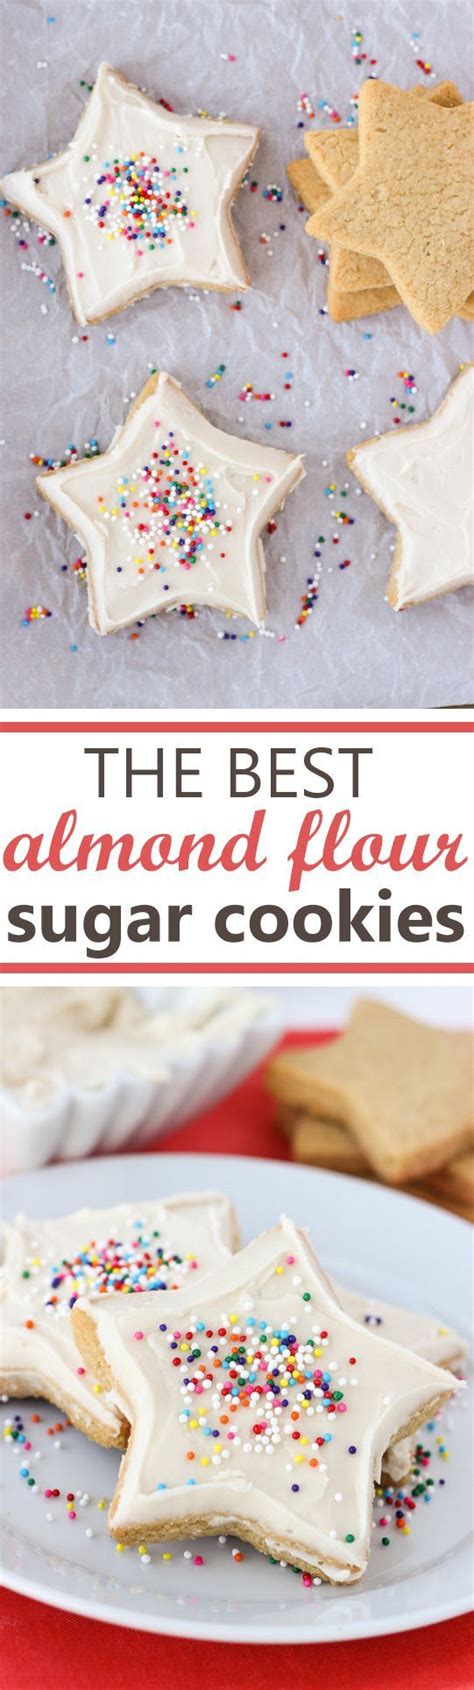 2 cups honeyville blanched almond flour 1/4 cup coconut oil, softened (or use butter instead) 1/4 cup raw honey 1/2 teaspoon almond extract 1/4 teaspoon fine sea salt. The Best Almond Flour Sugar Cookies (Gluten-Free, Grain ...